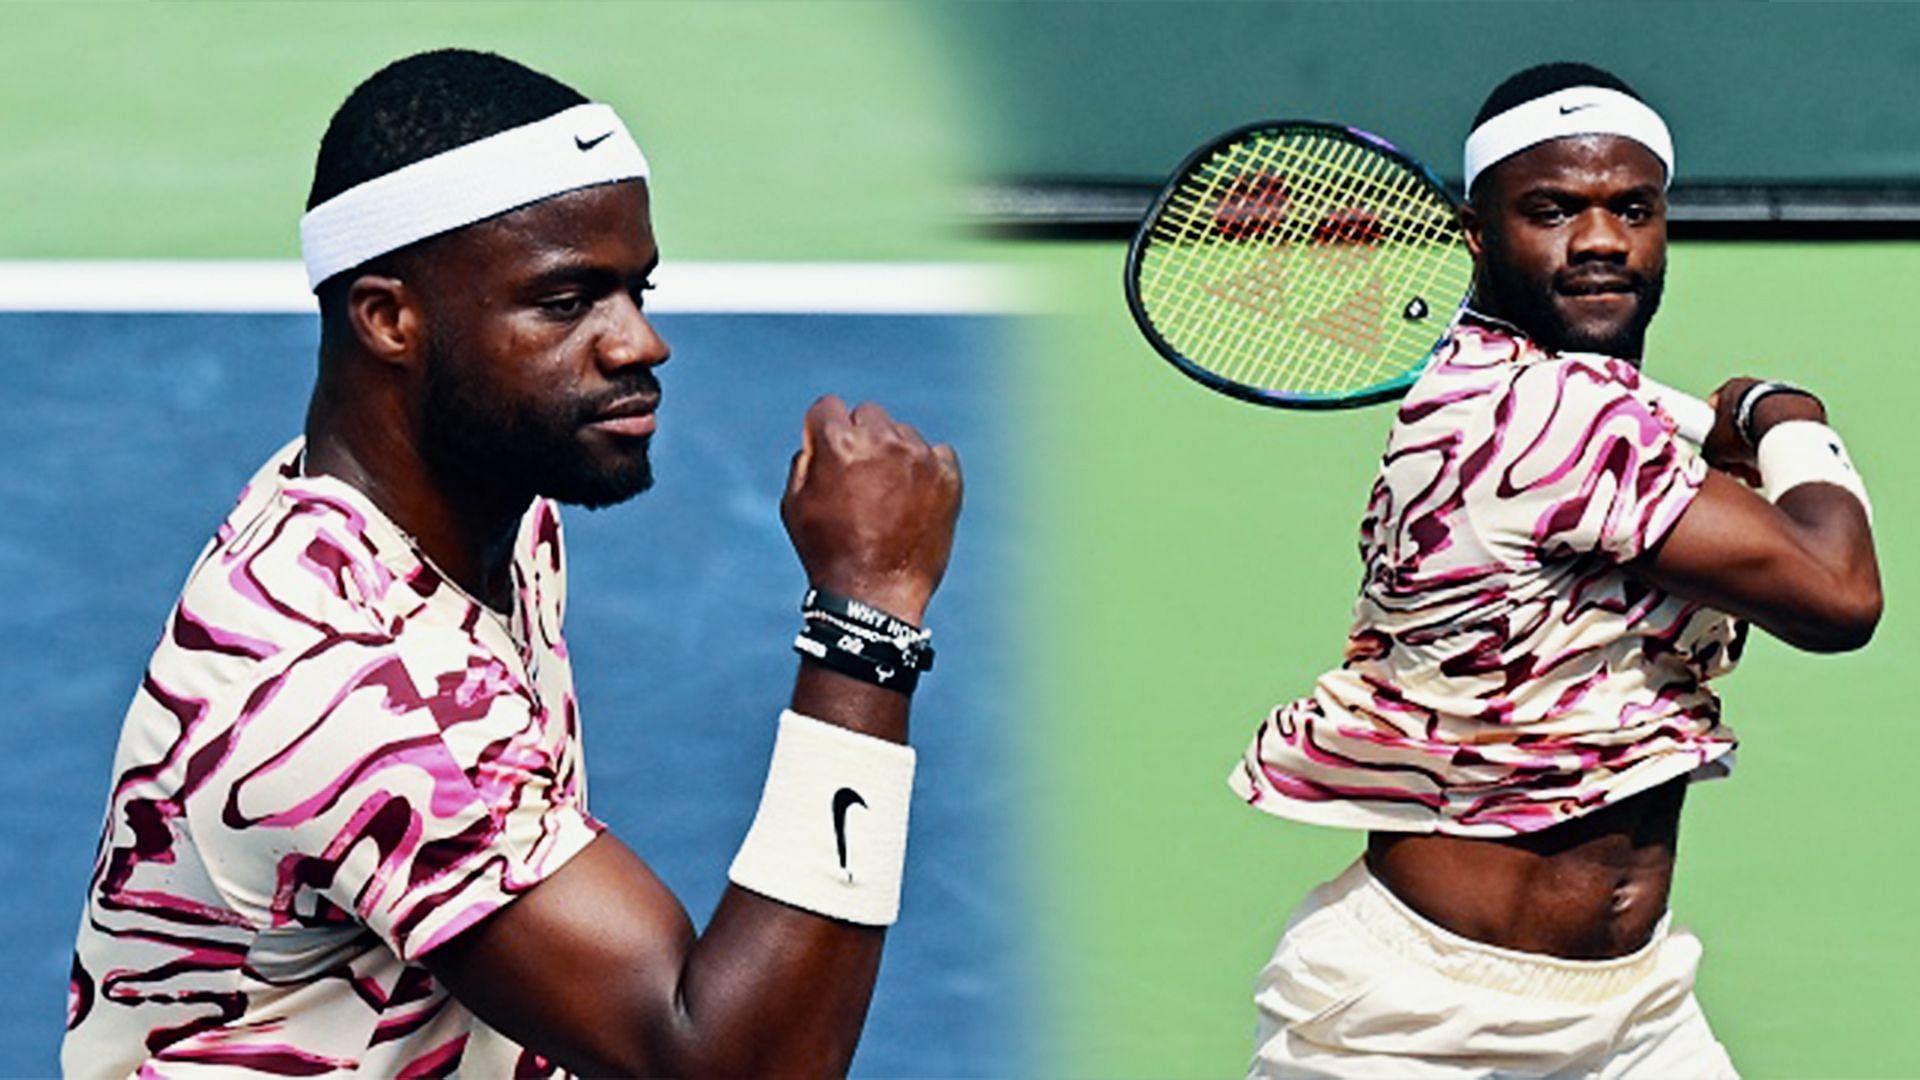 Frances Tiafoe is into the Indian Wells semifinals.